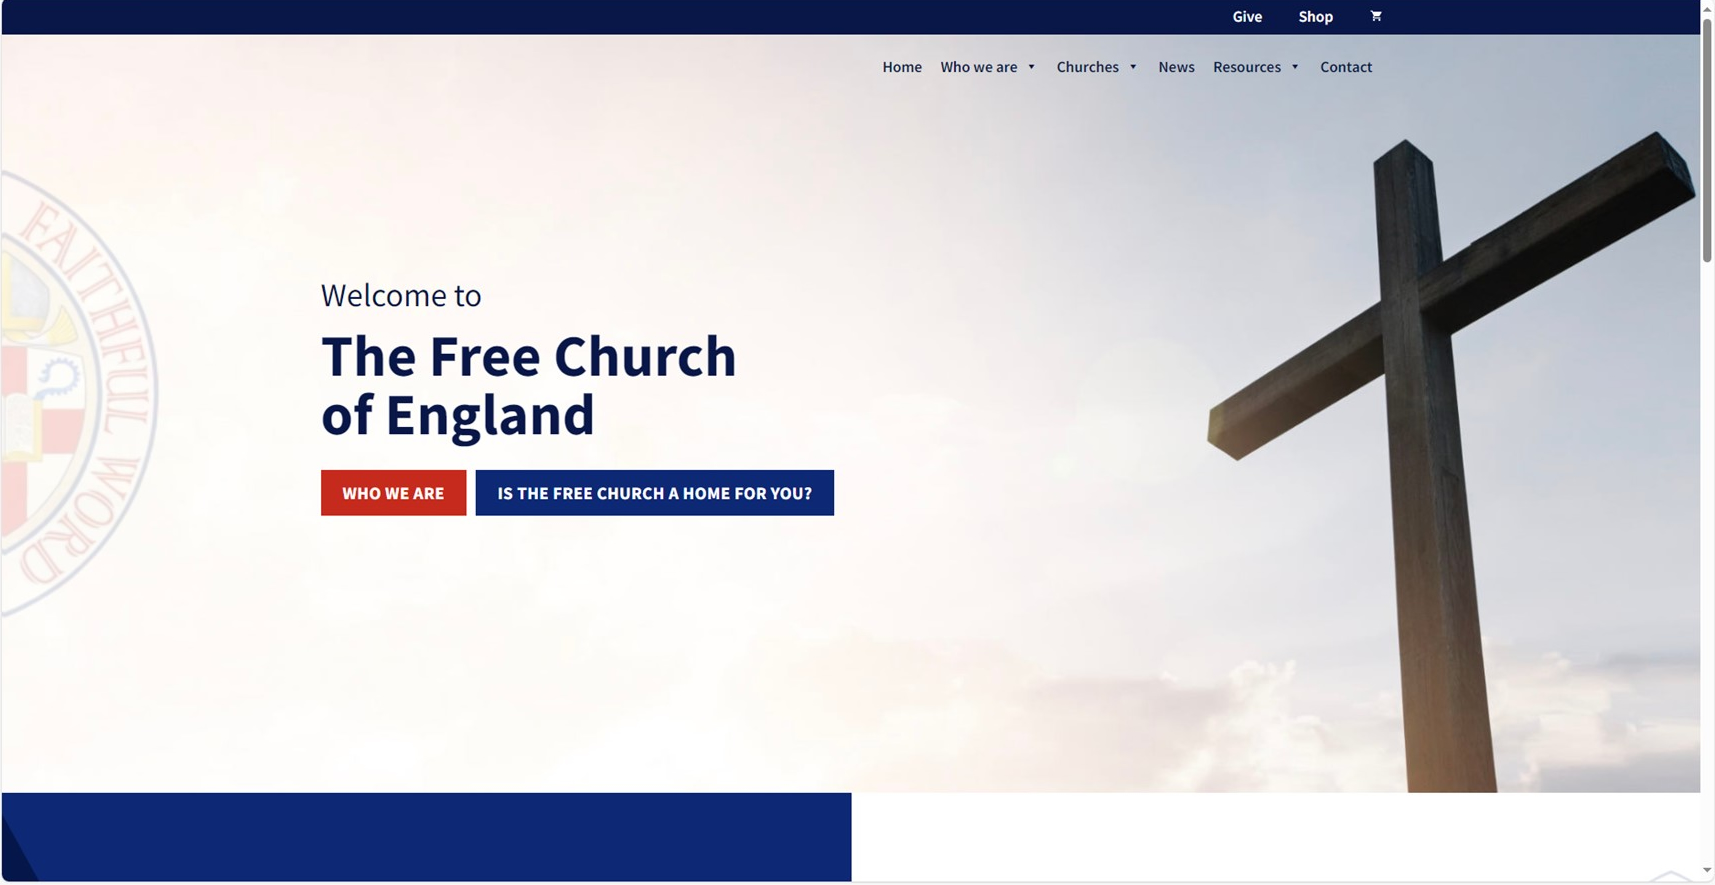 The Free Church of England